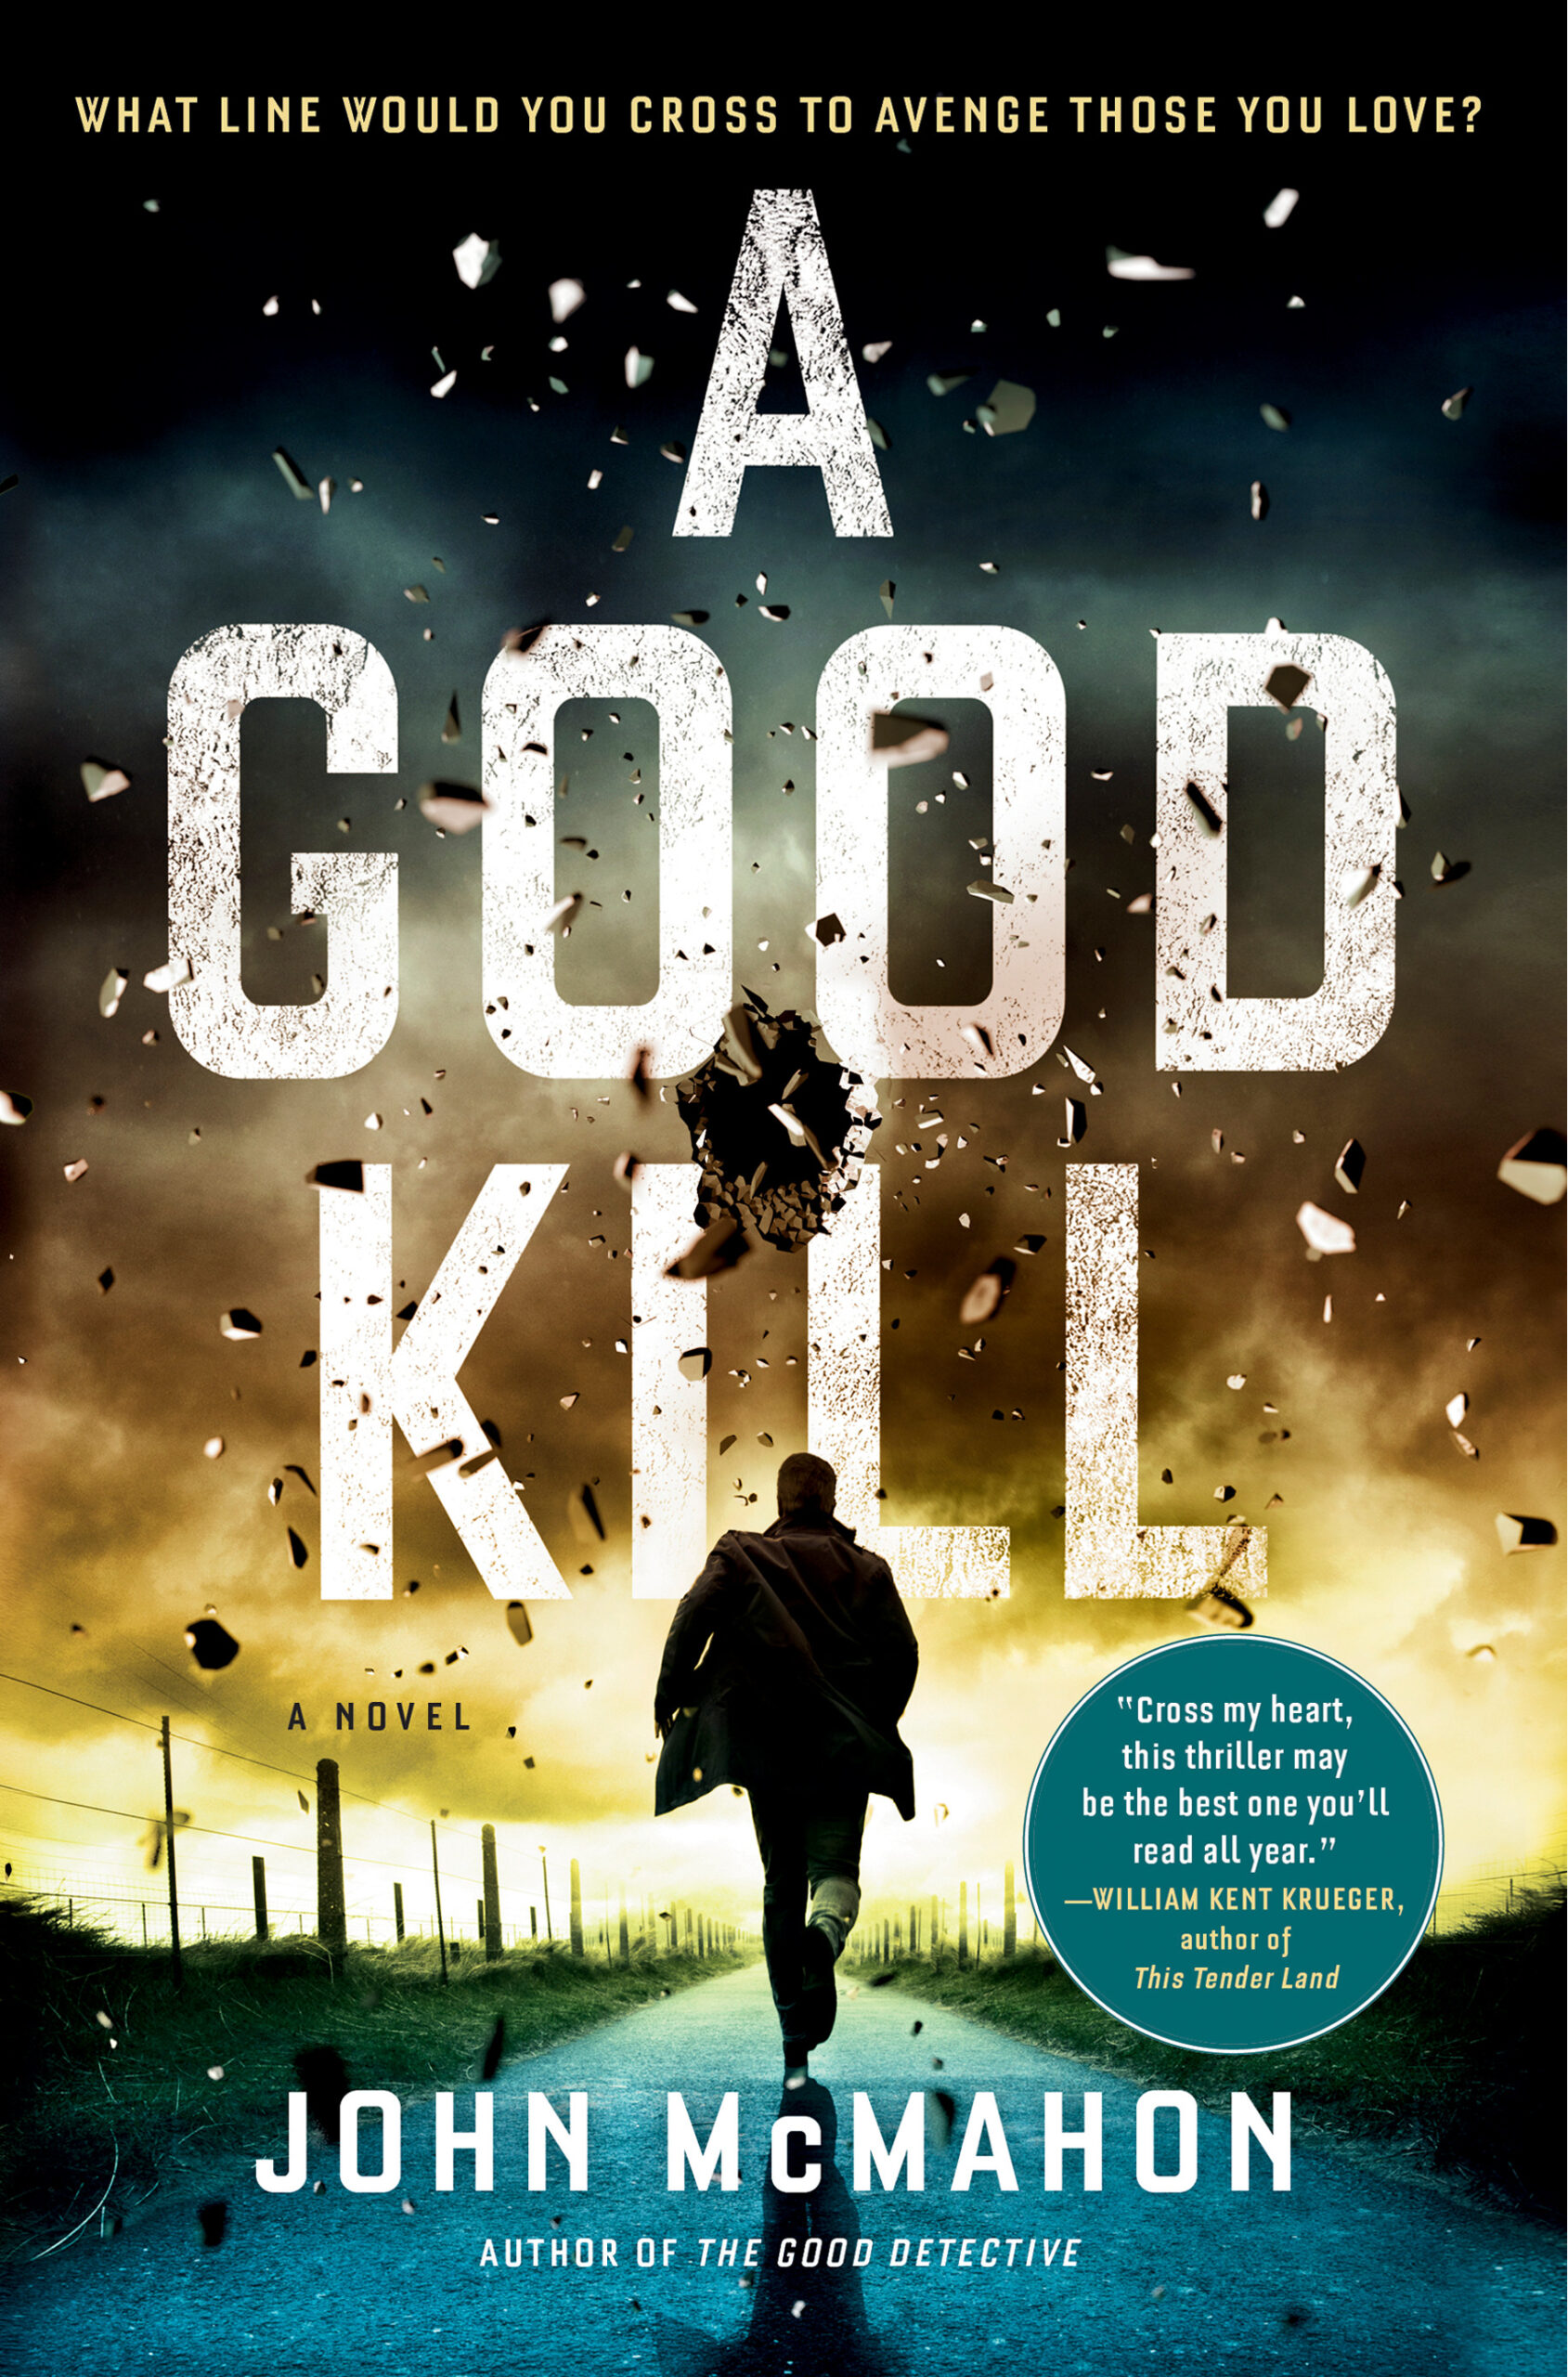 Read more about the article A Good Kill: The Latest Novel by John McMahon